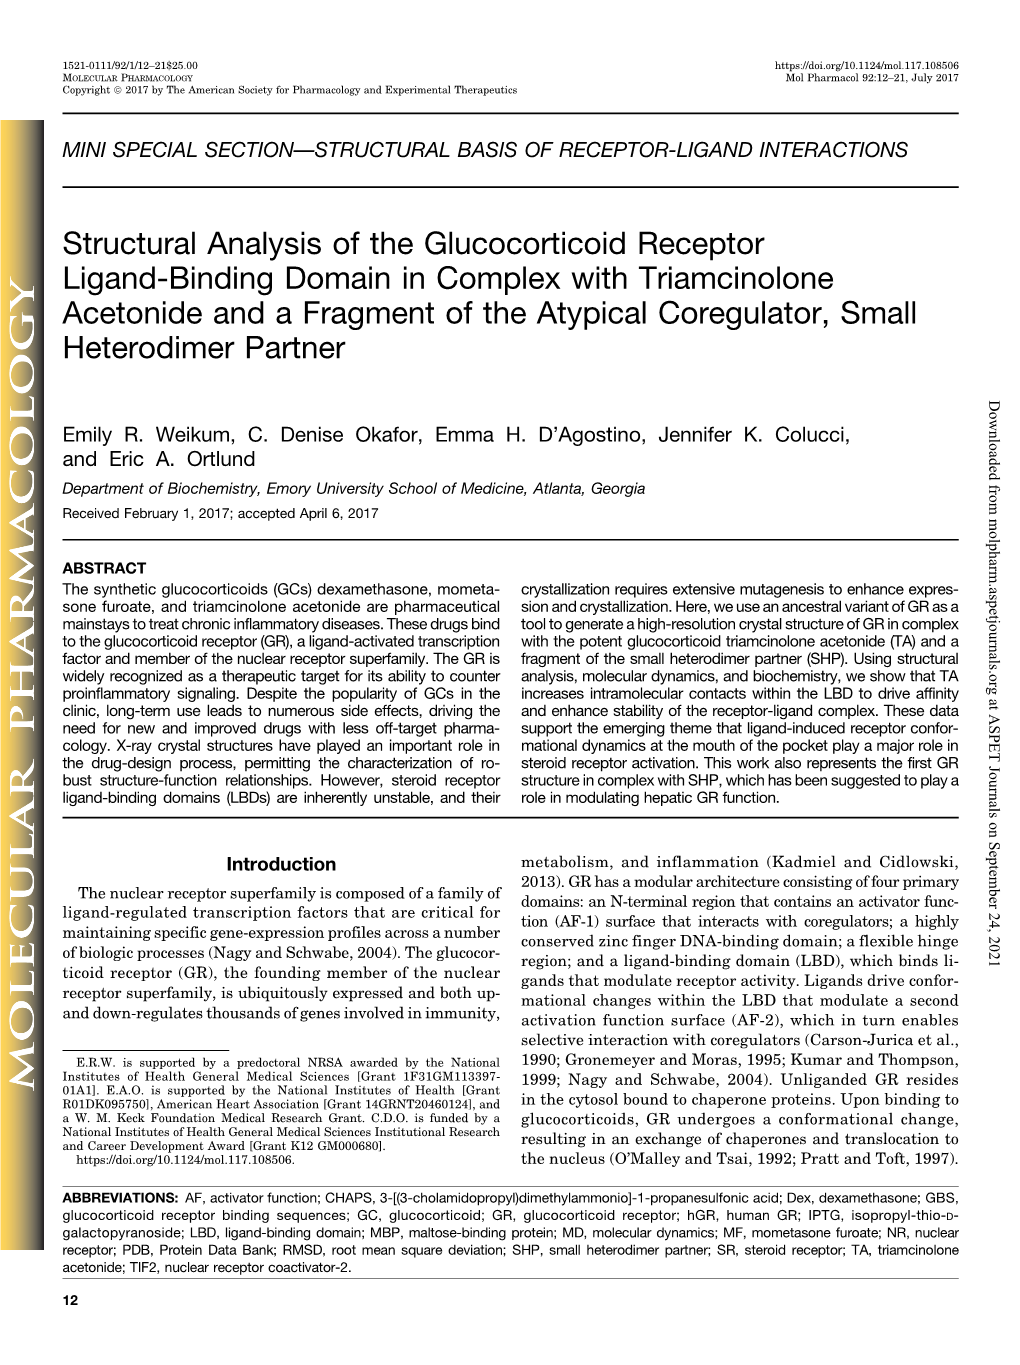 Structural Analysis of the Glucocorticoid Receptor Ligand